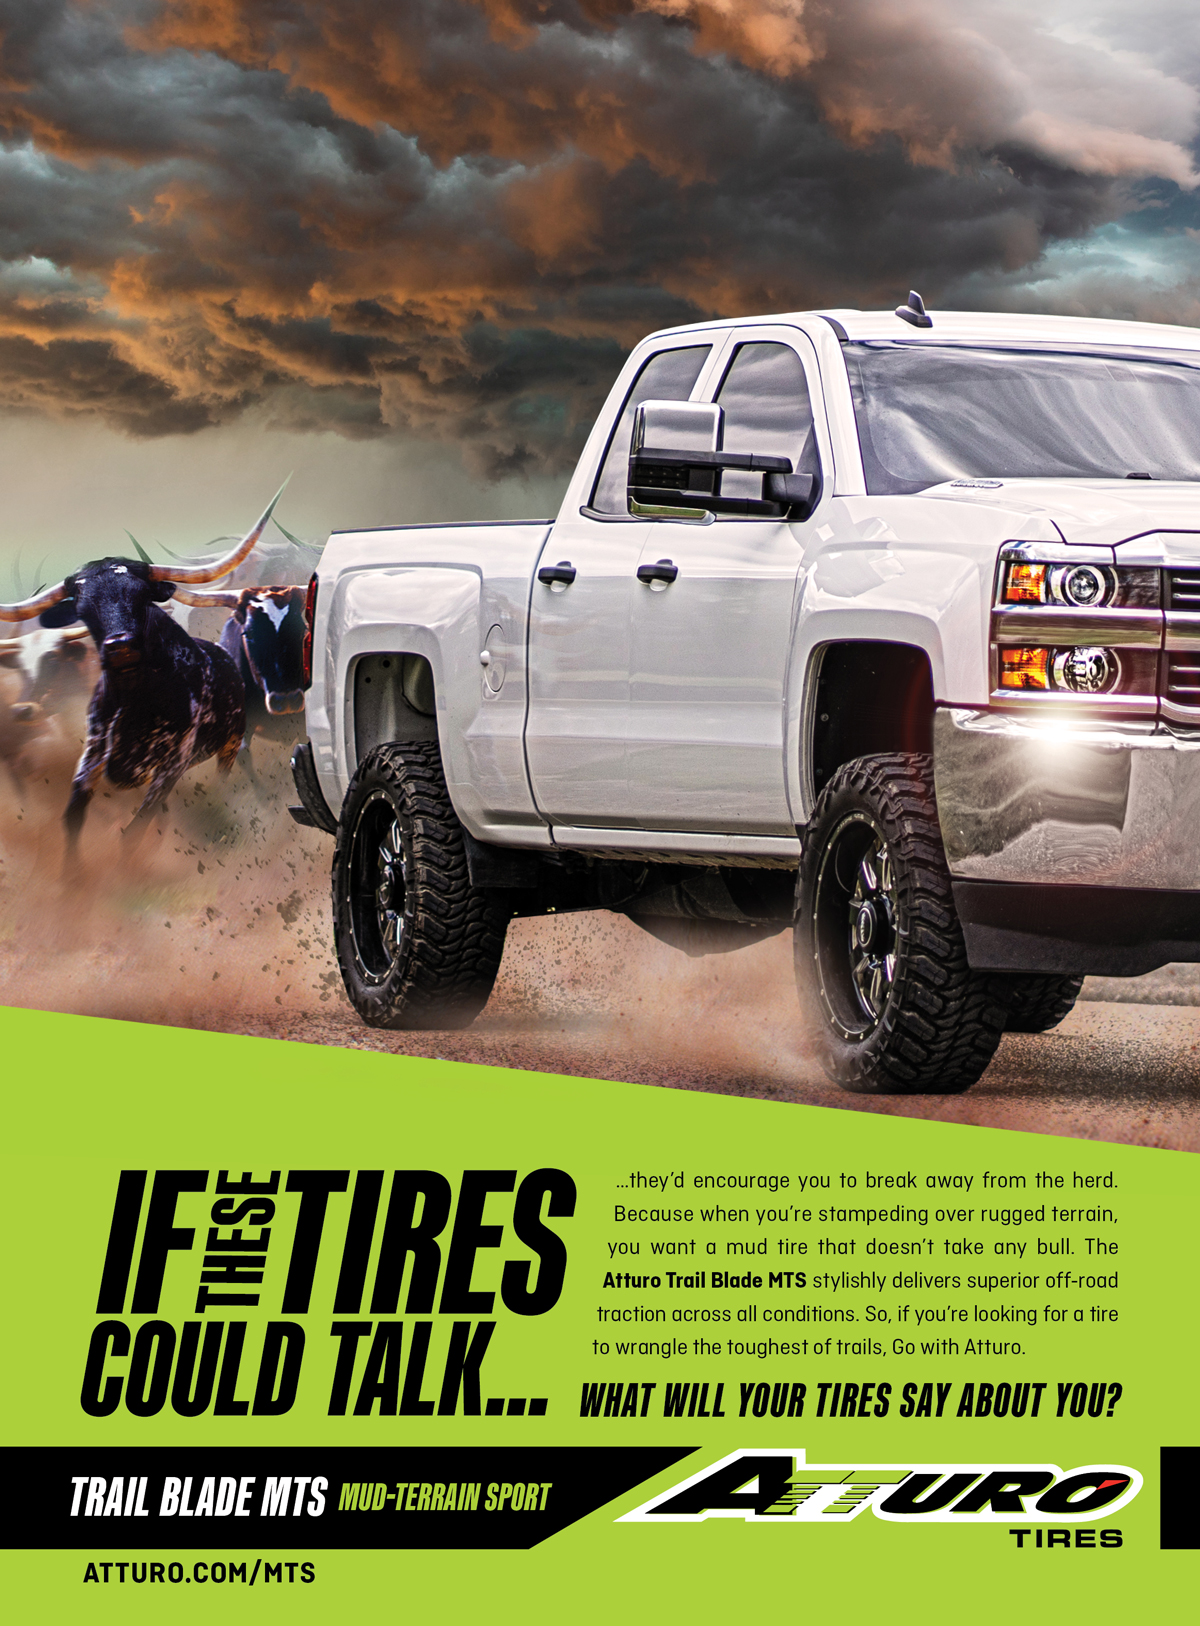 Atturo Tires - Print Ad - If These Tires Could Talk - Trail Blade MTS